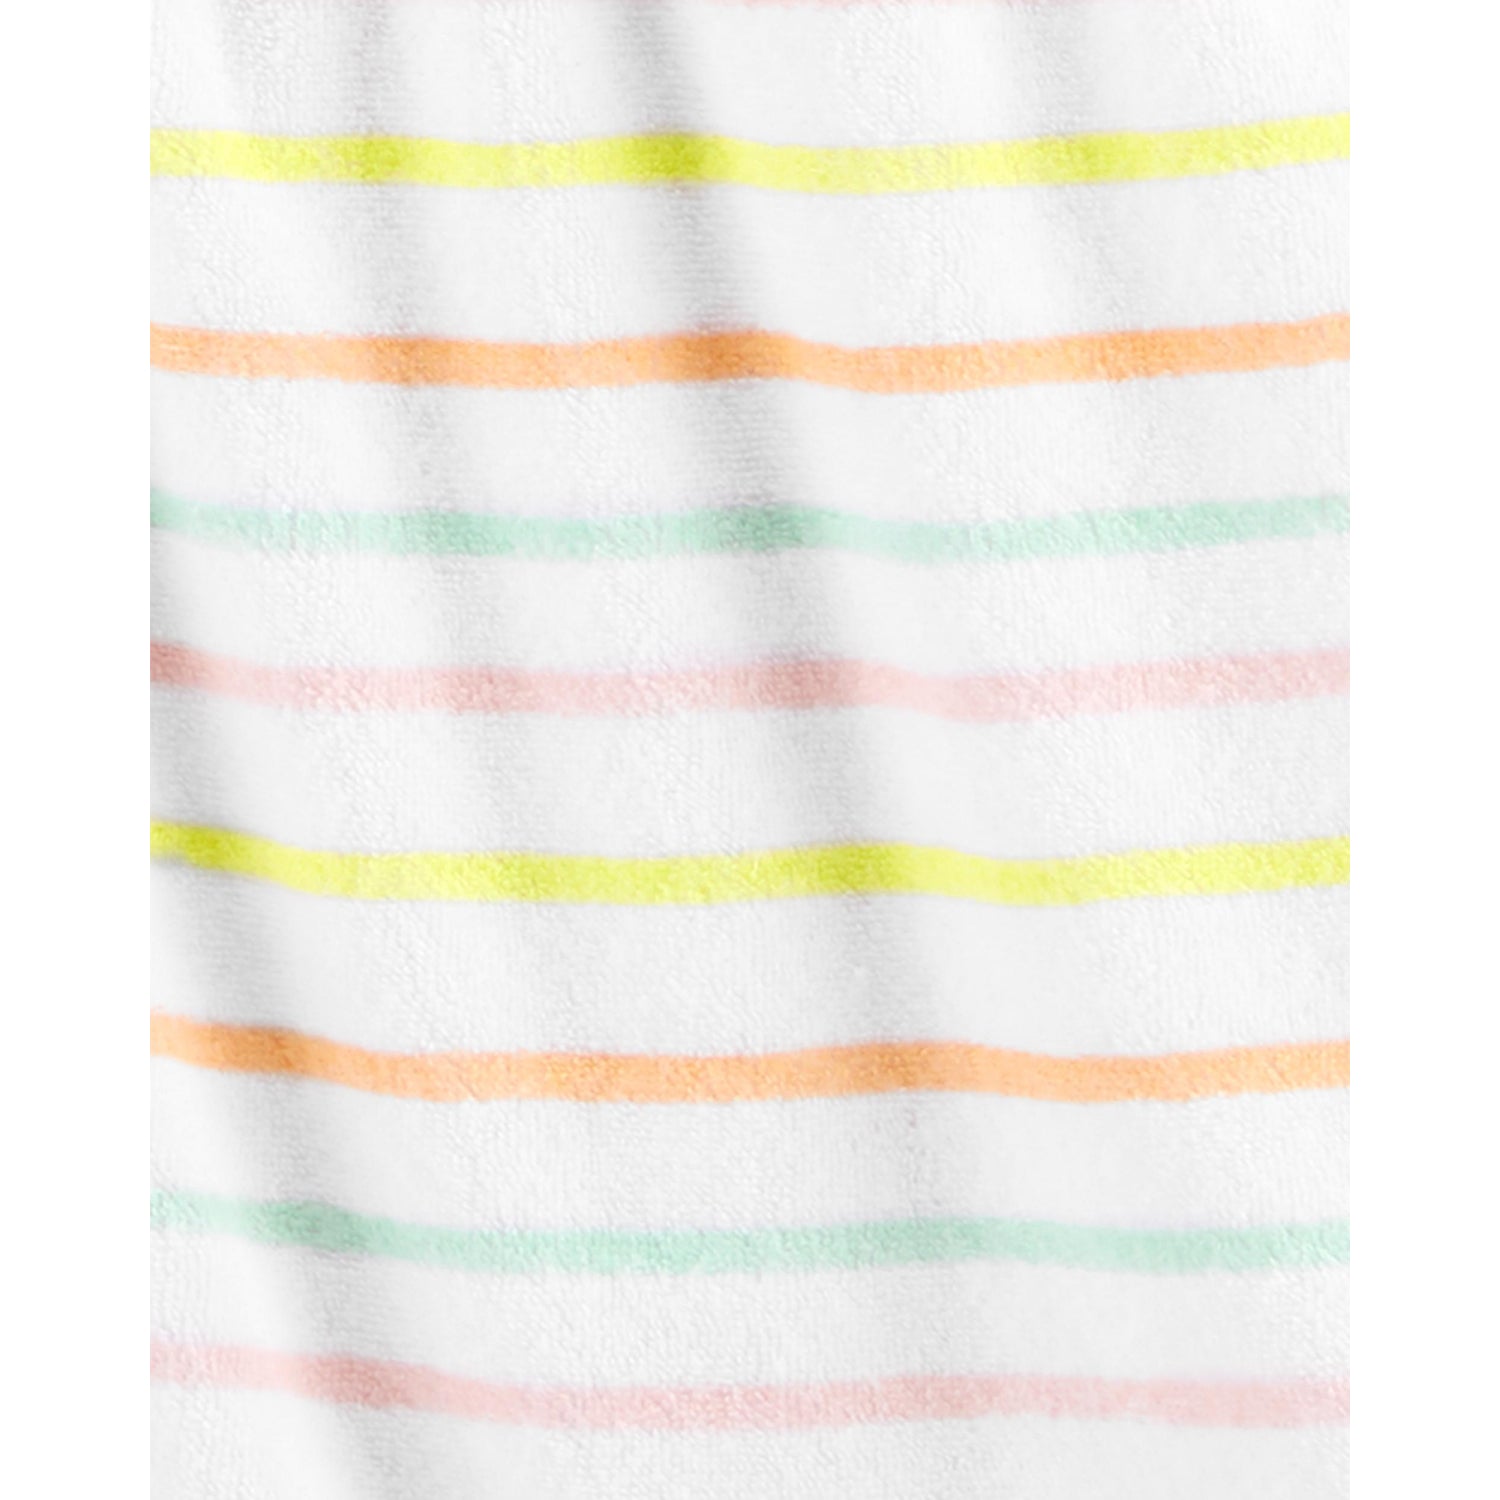 Carters Girls 2T-5T Striped Hooded Cover-Up